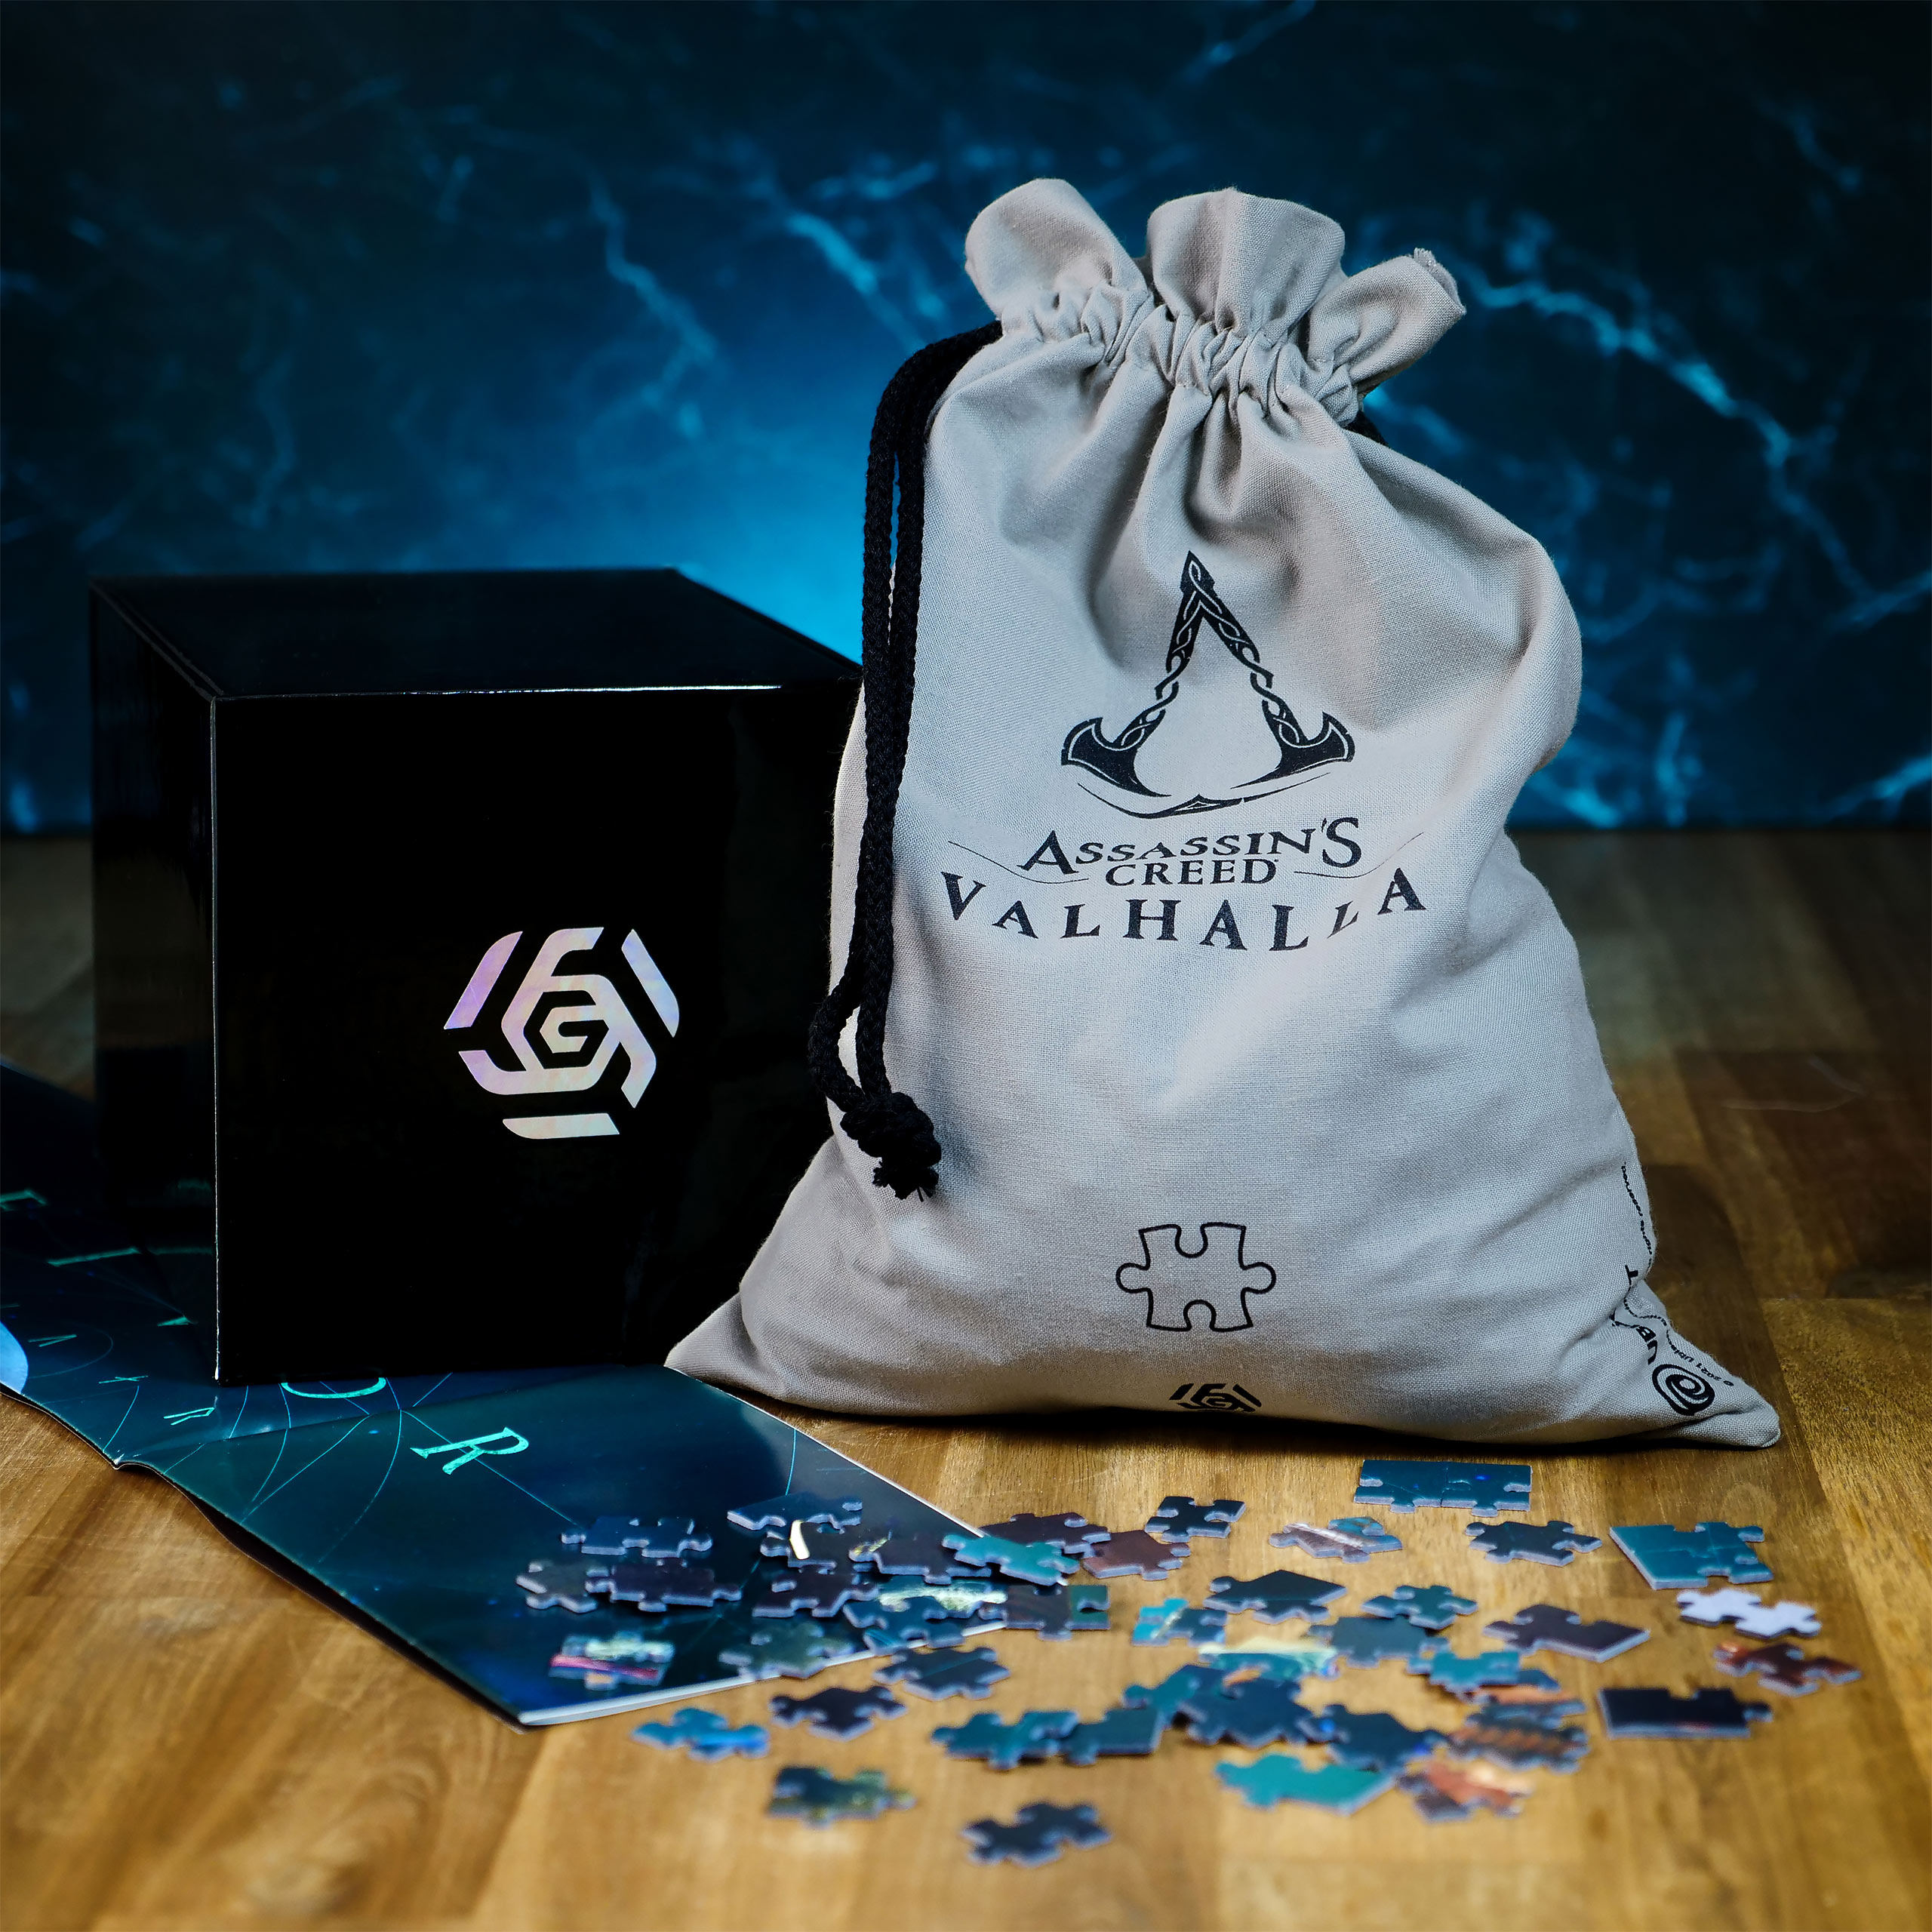 Assassin's Creed Valhalla - Eivor Puzzle with Logo Cloth Bag